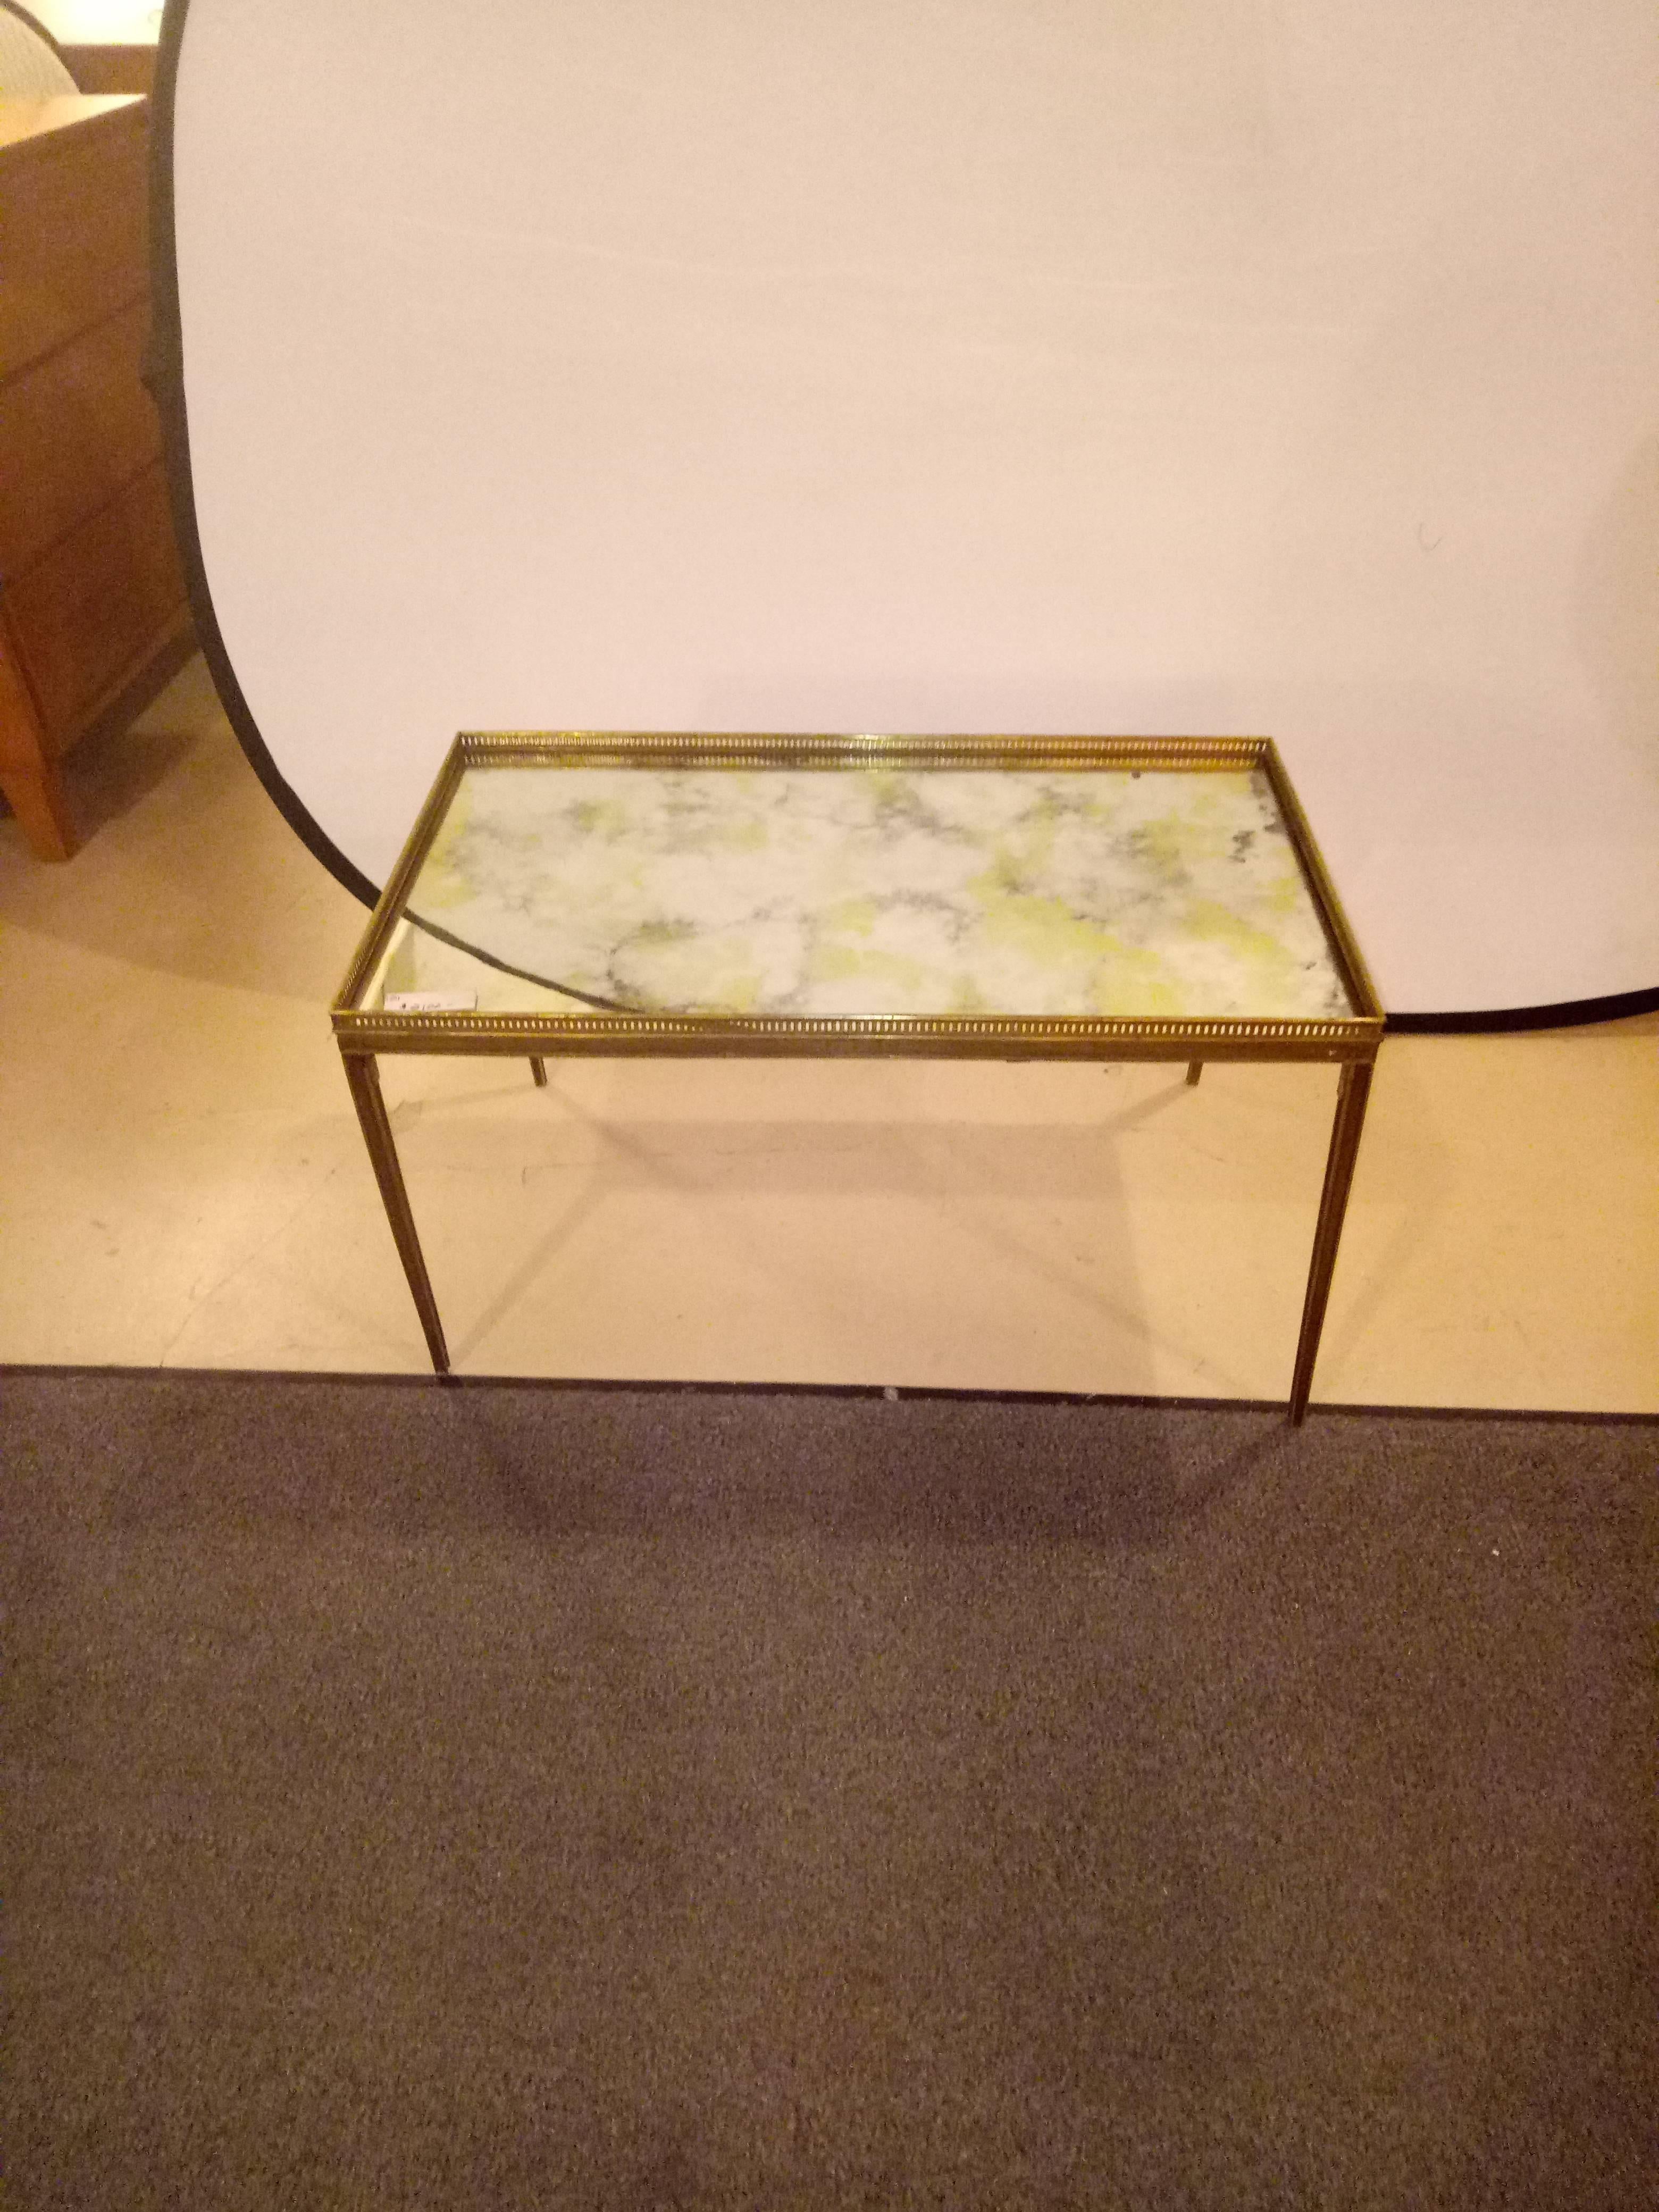 Hollywood Regency Coffee Table with Mirror Top in Maison Baguès Style